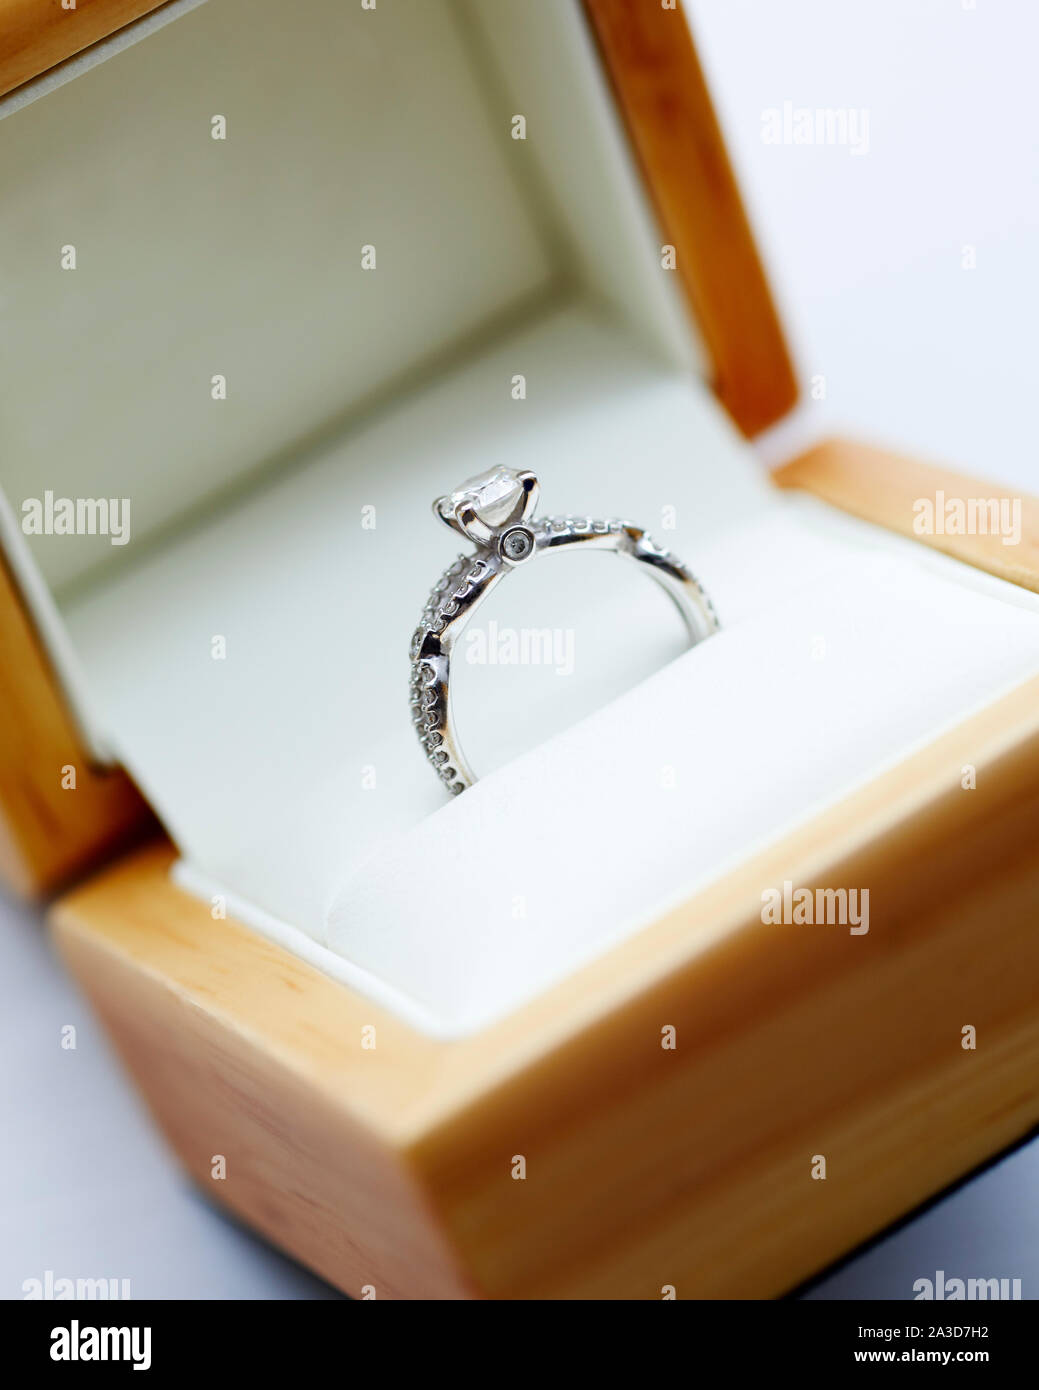 Diamond engagement ring in it's wooden display box Stock Photo